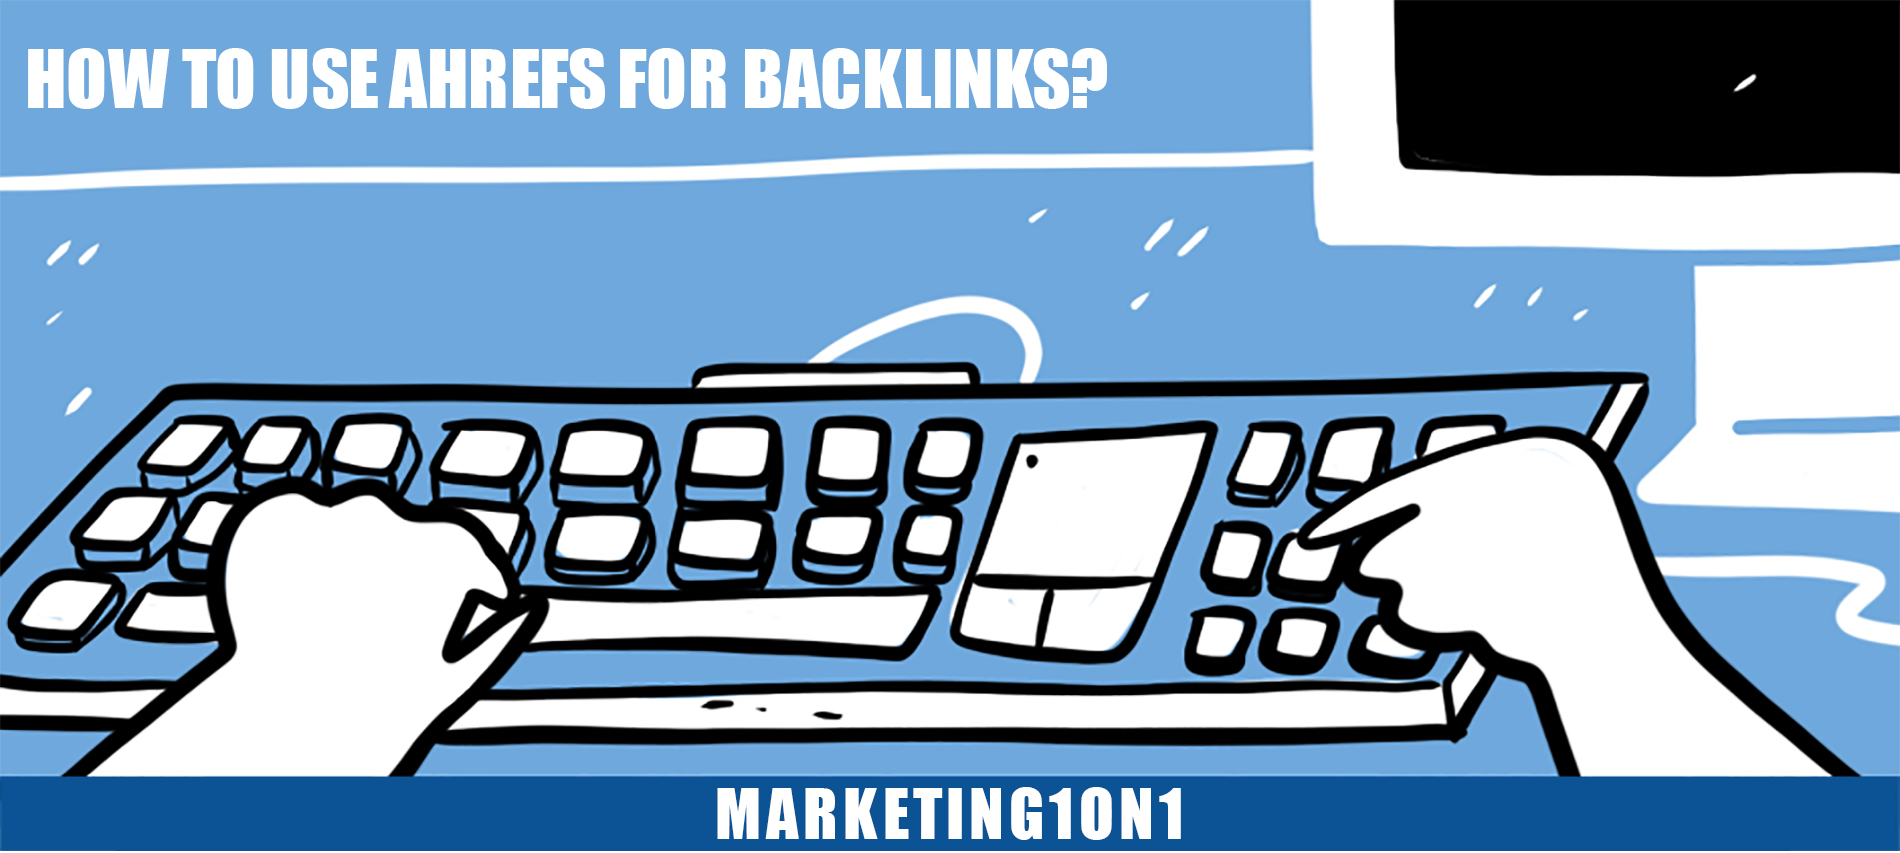 How to use ahrefs for backlinks?